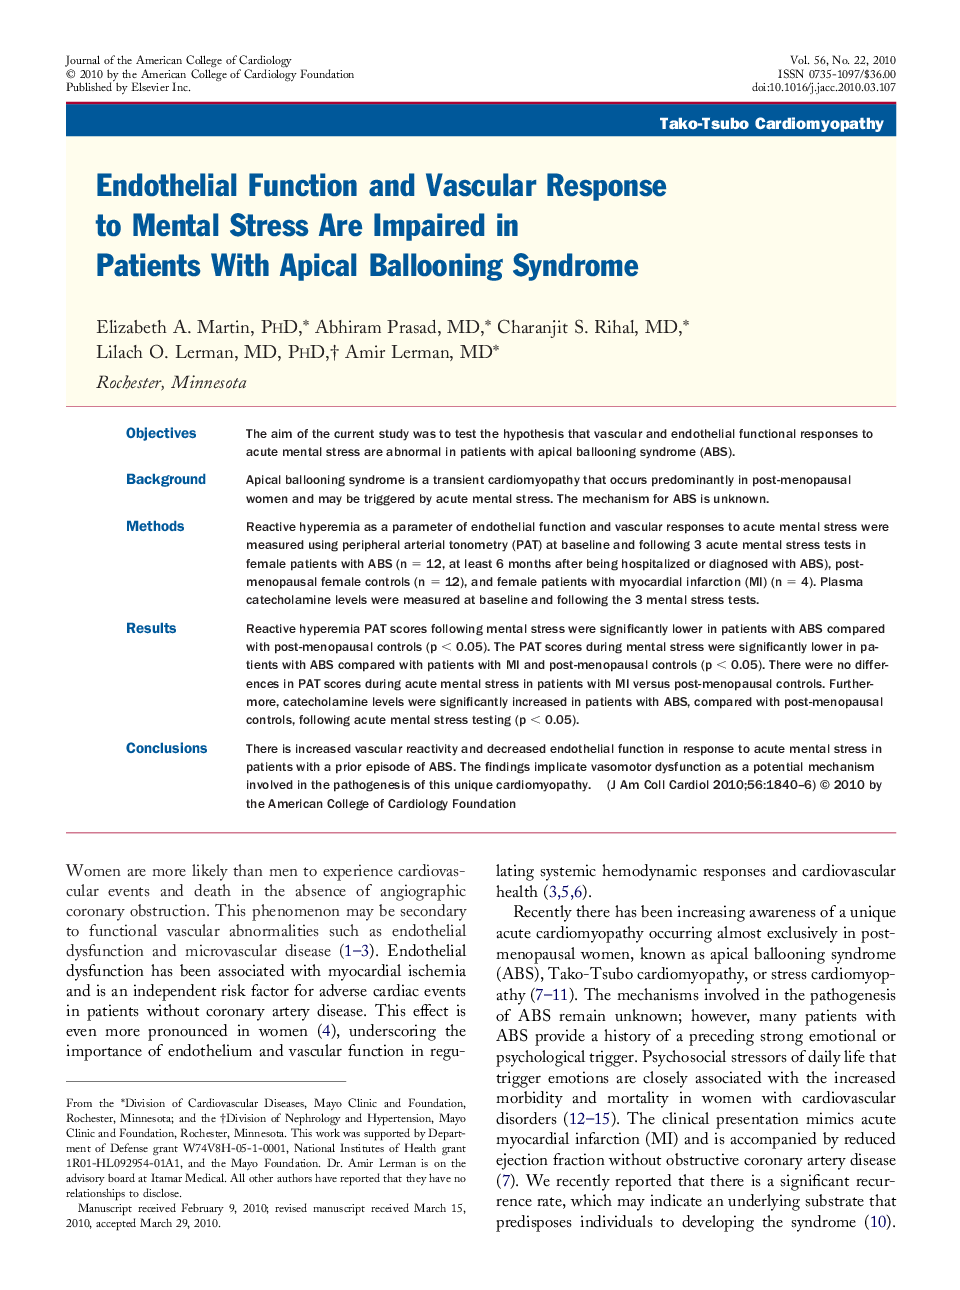 Endothelial Function and Vascular Response to Mental Stress Are Impaired in Patients With Apical Ballooning Syndrome 